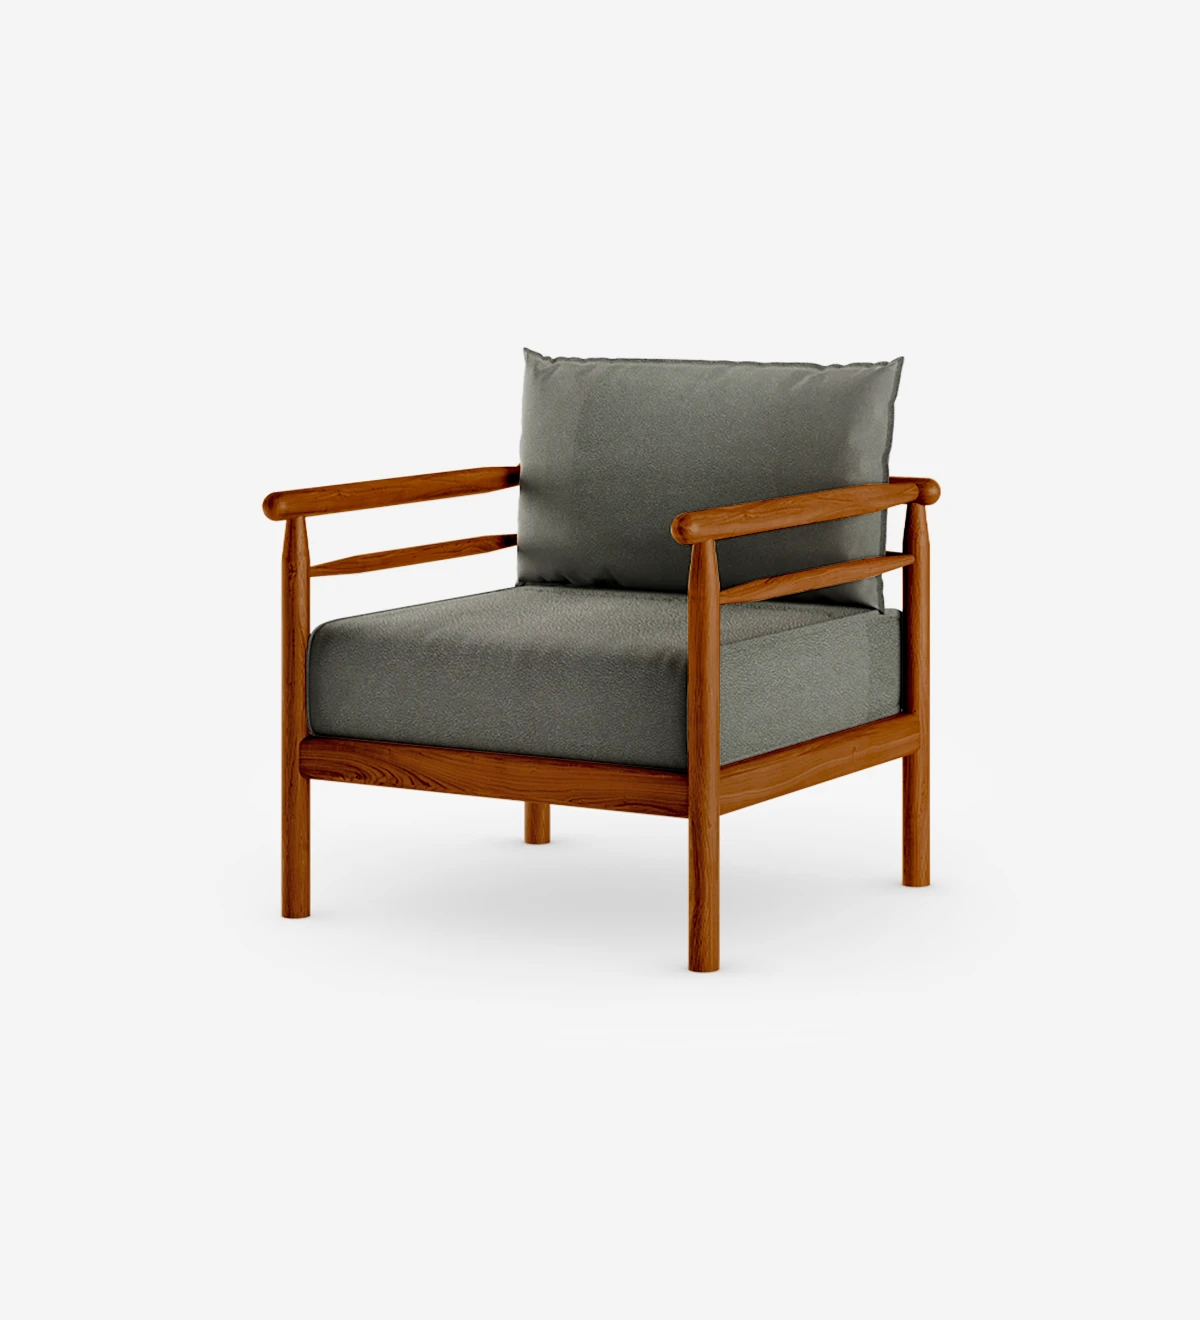 Maple with fabric upholstered cushions and structure in honey-colored natural wood.